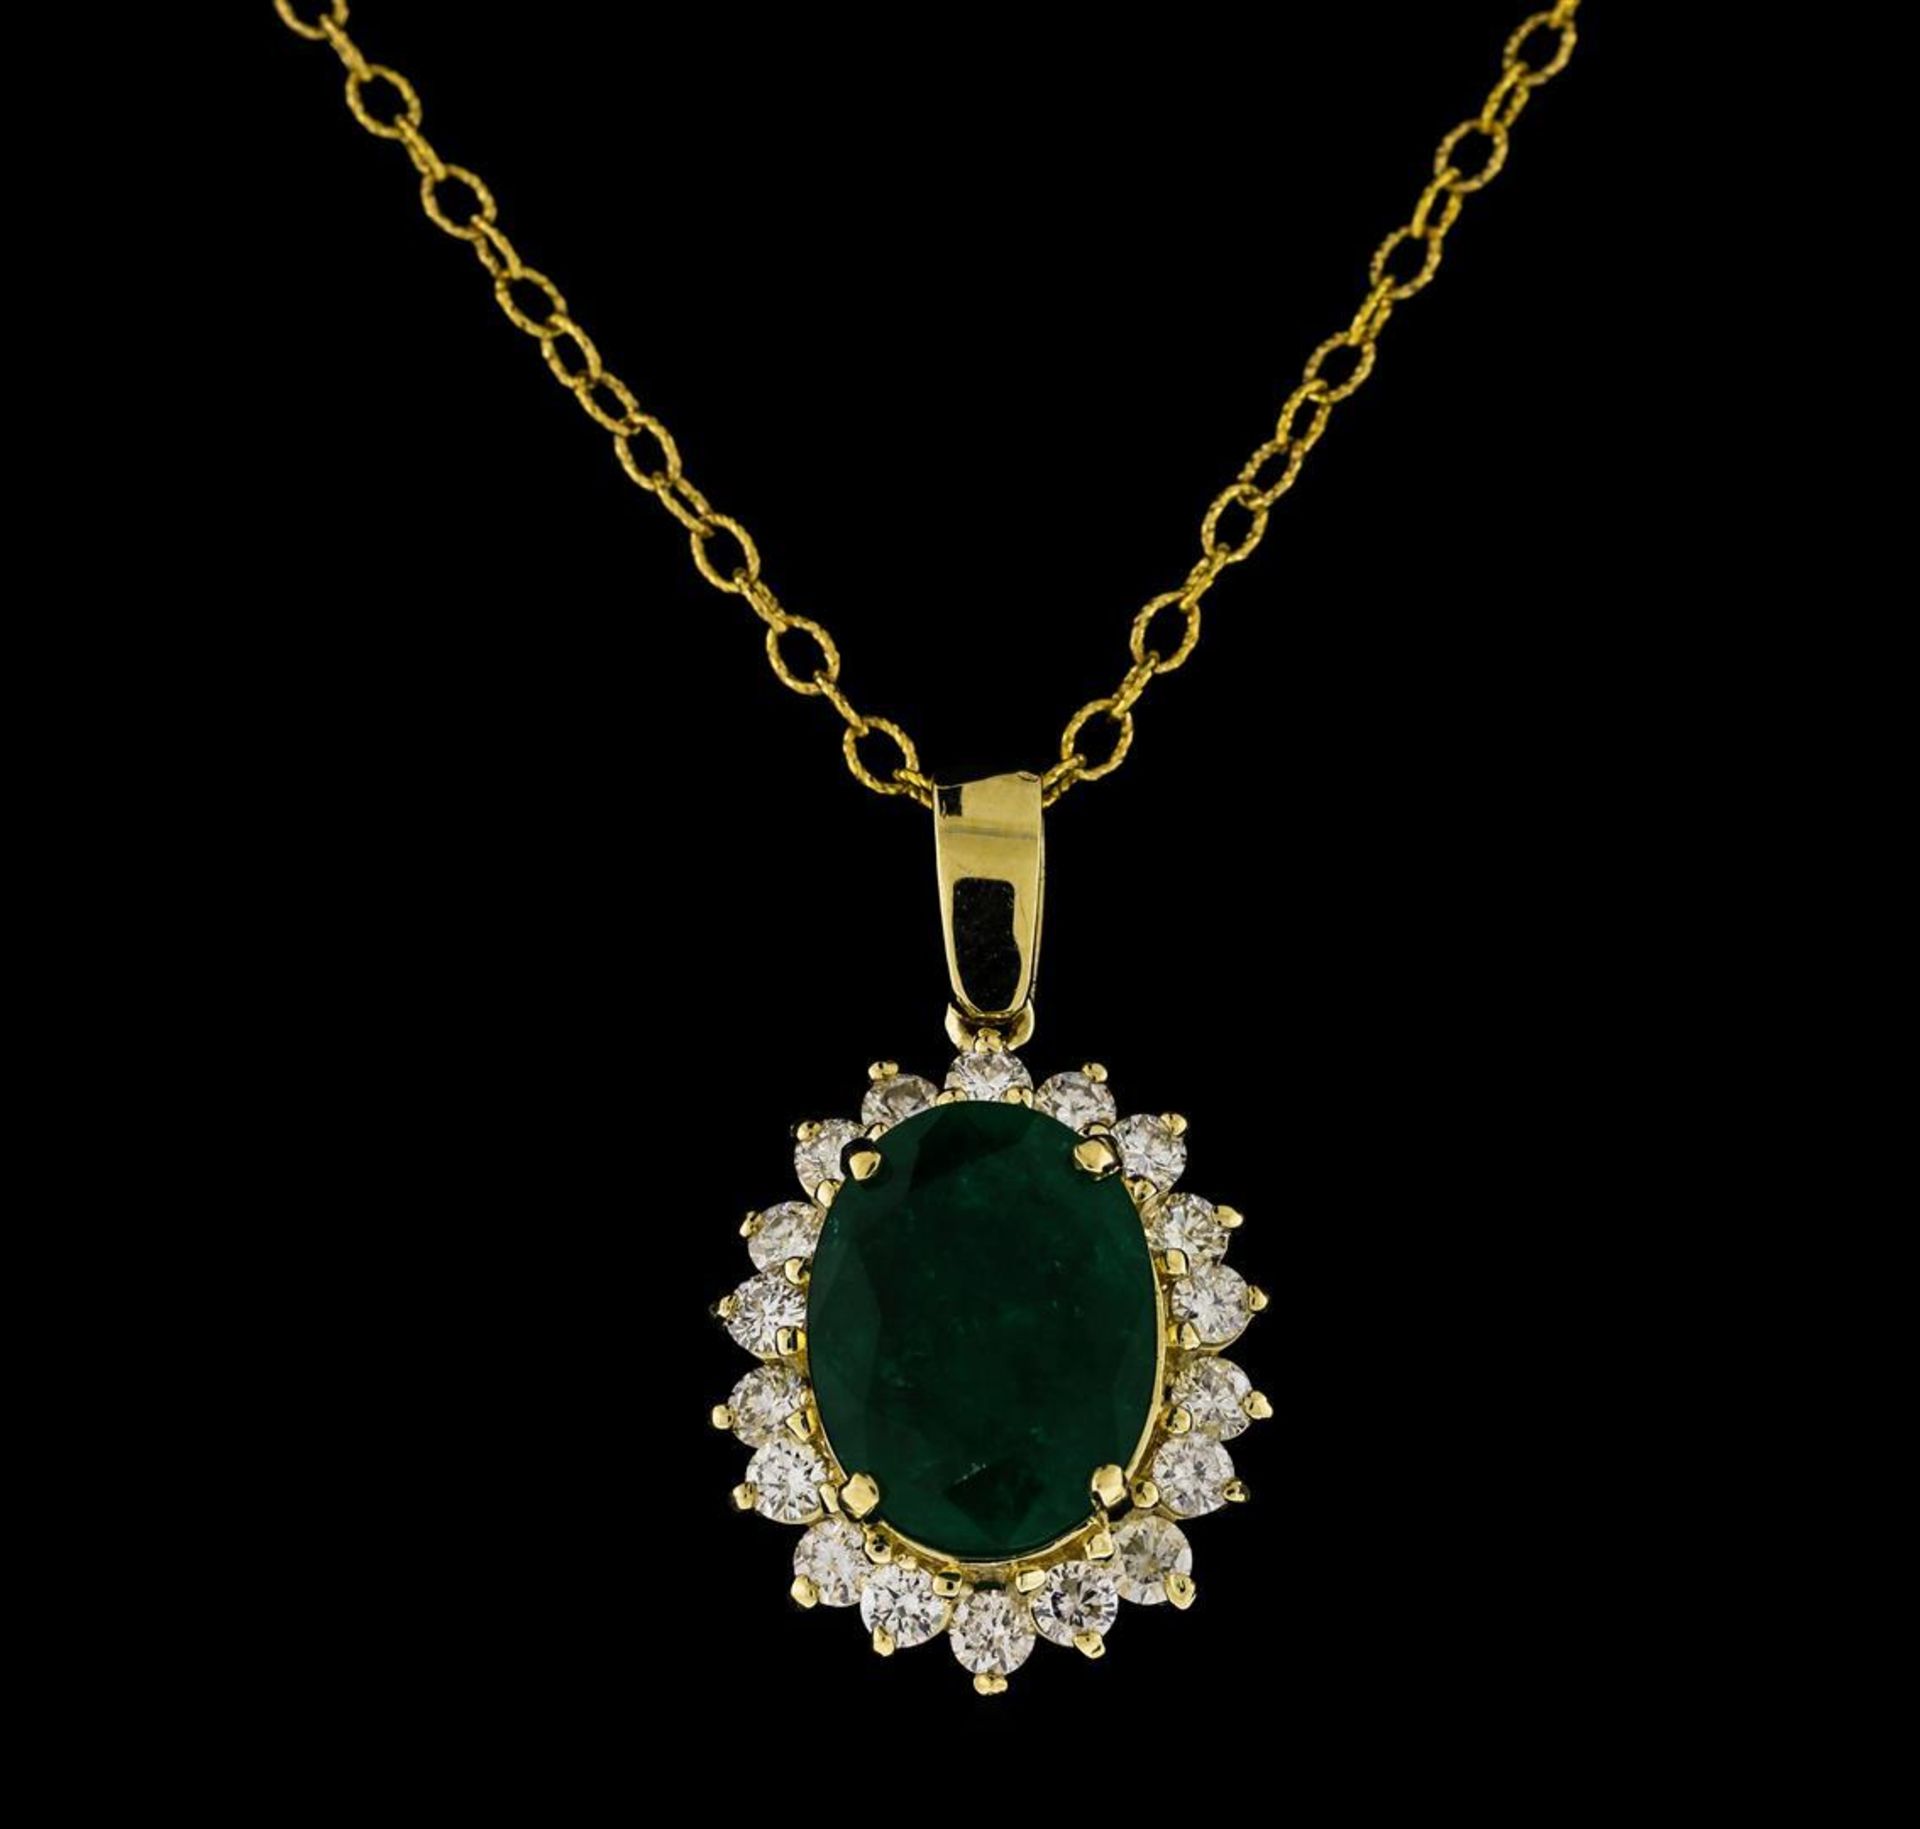 4.38 ctw Emerald and Diamond Pendant With Chain - 14KT Yellow Gold - Image 2 of 3